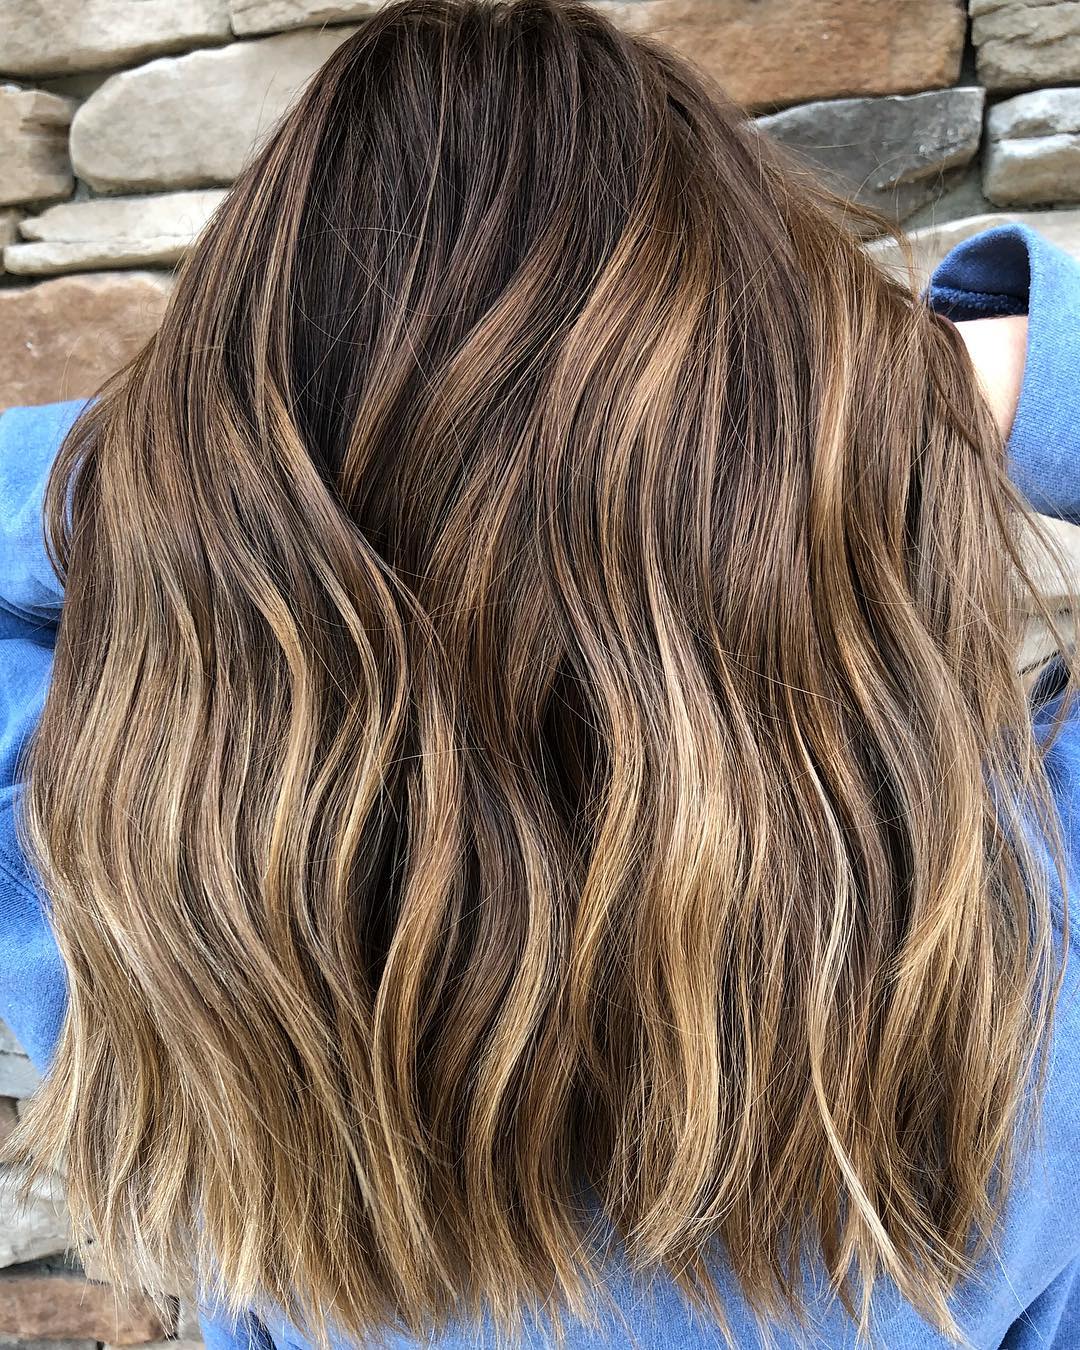 Long Brown Hair With Subtle Highlights